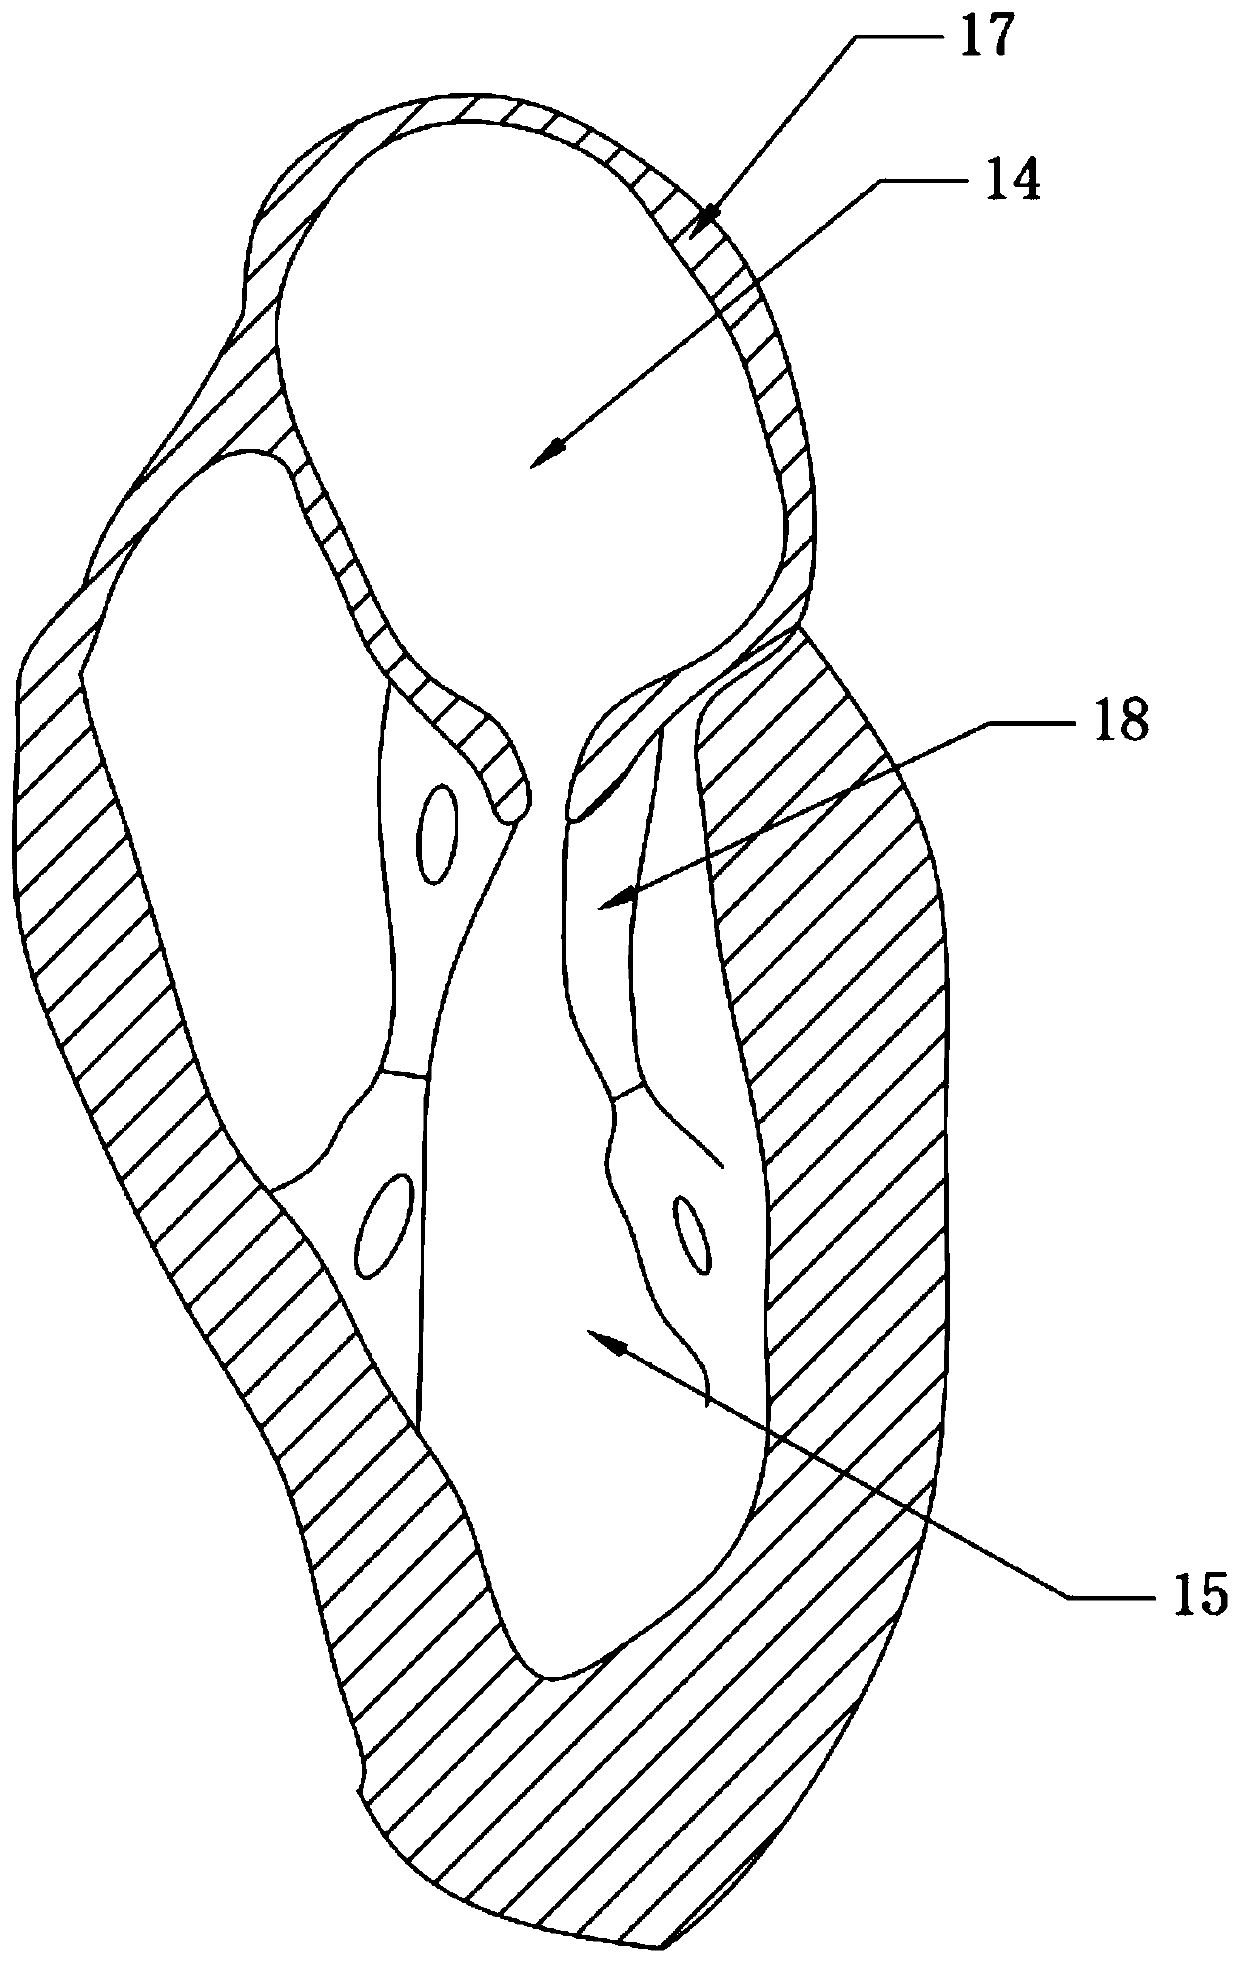 Pruning and measuring device for left atrium of transplanted heart, and use method of pruning and measuring device